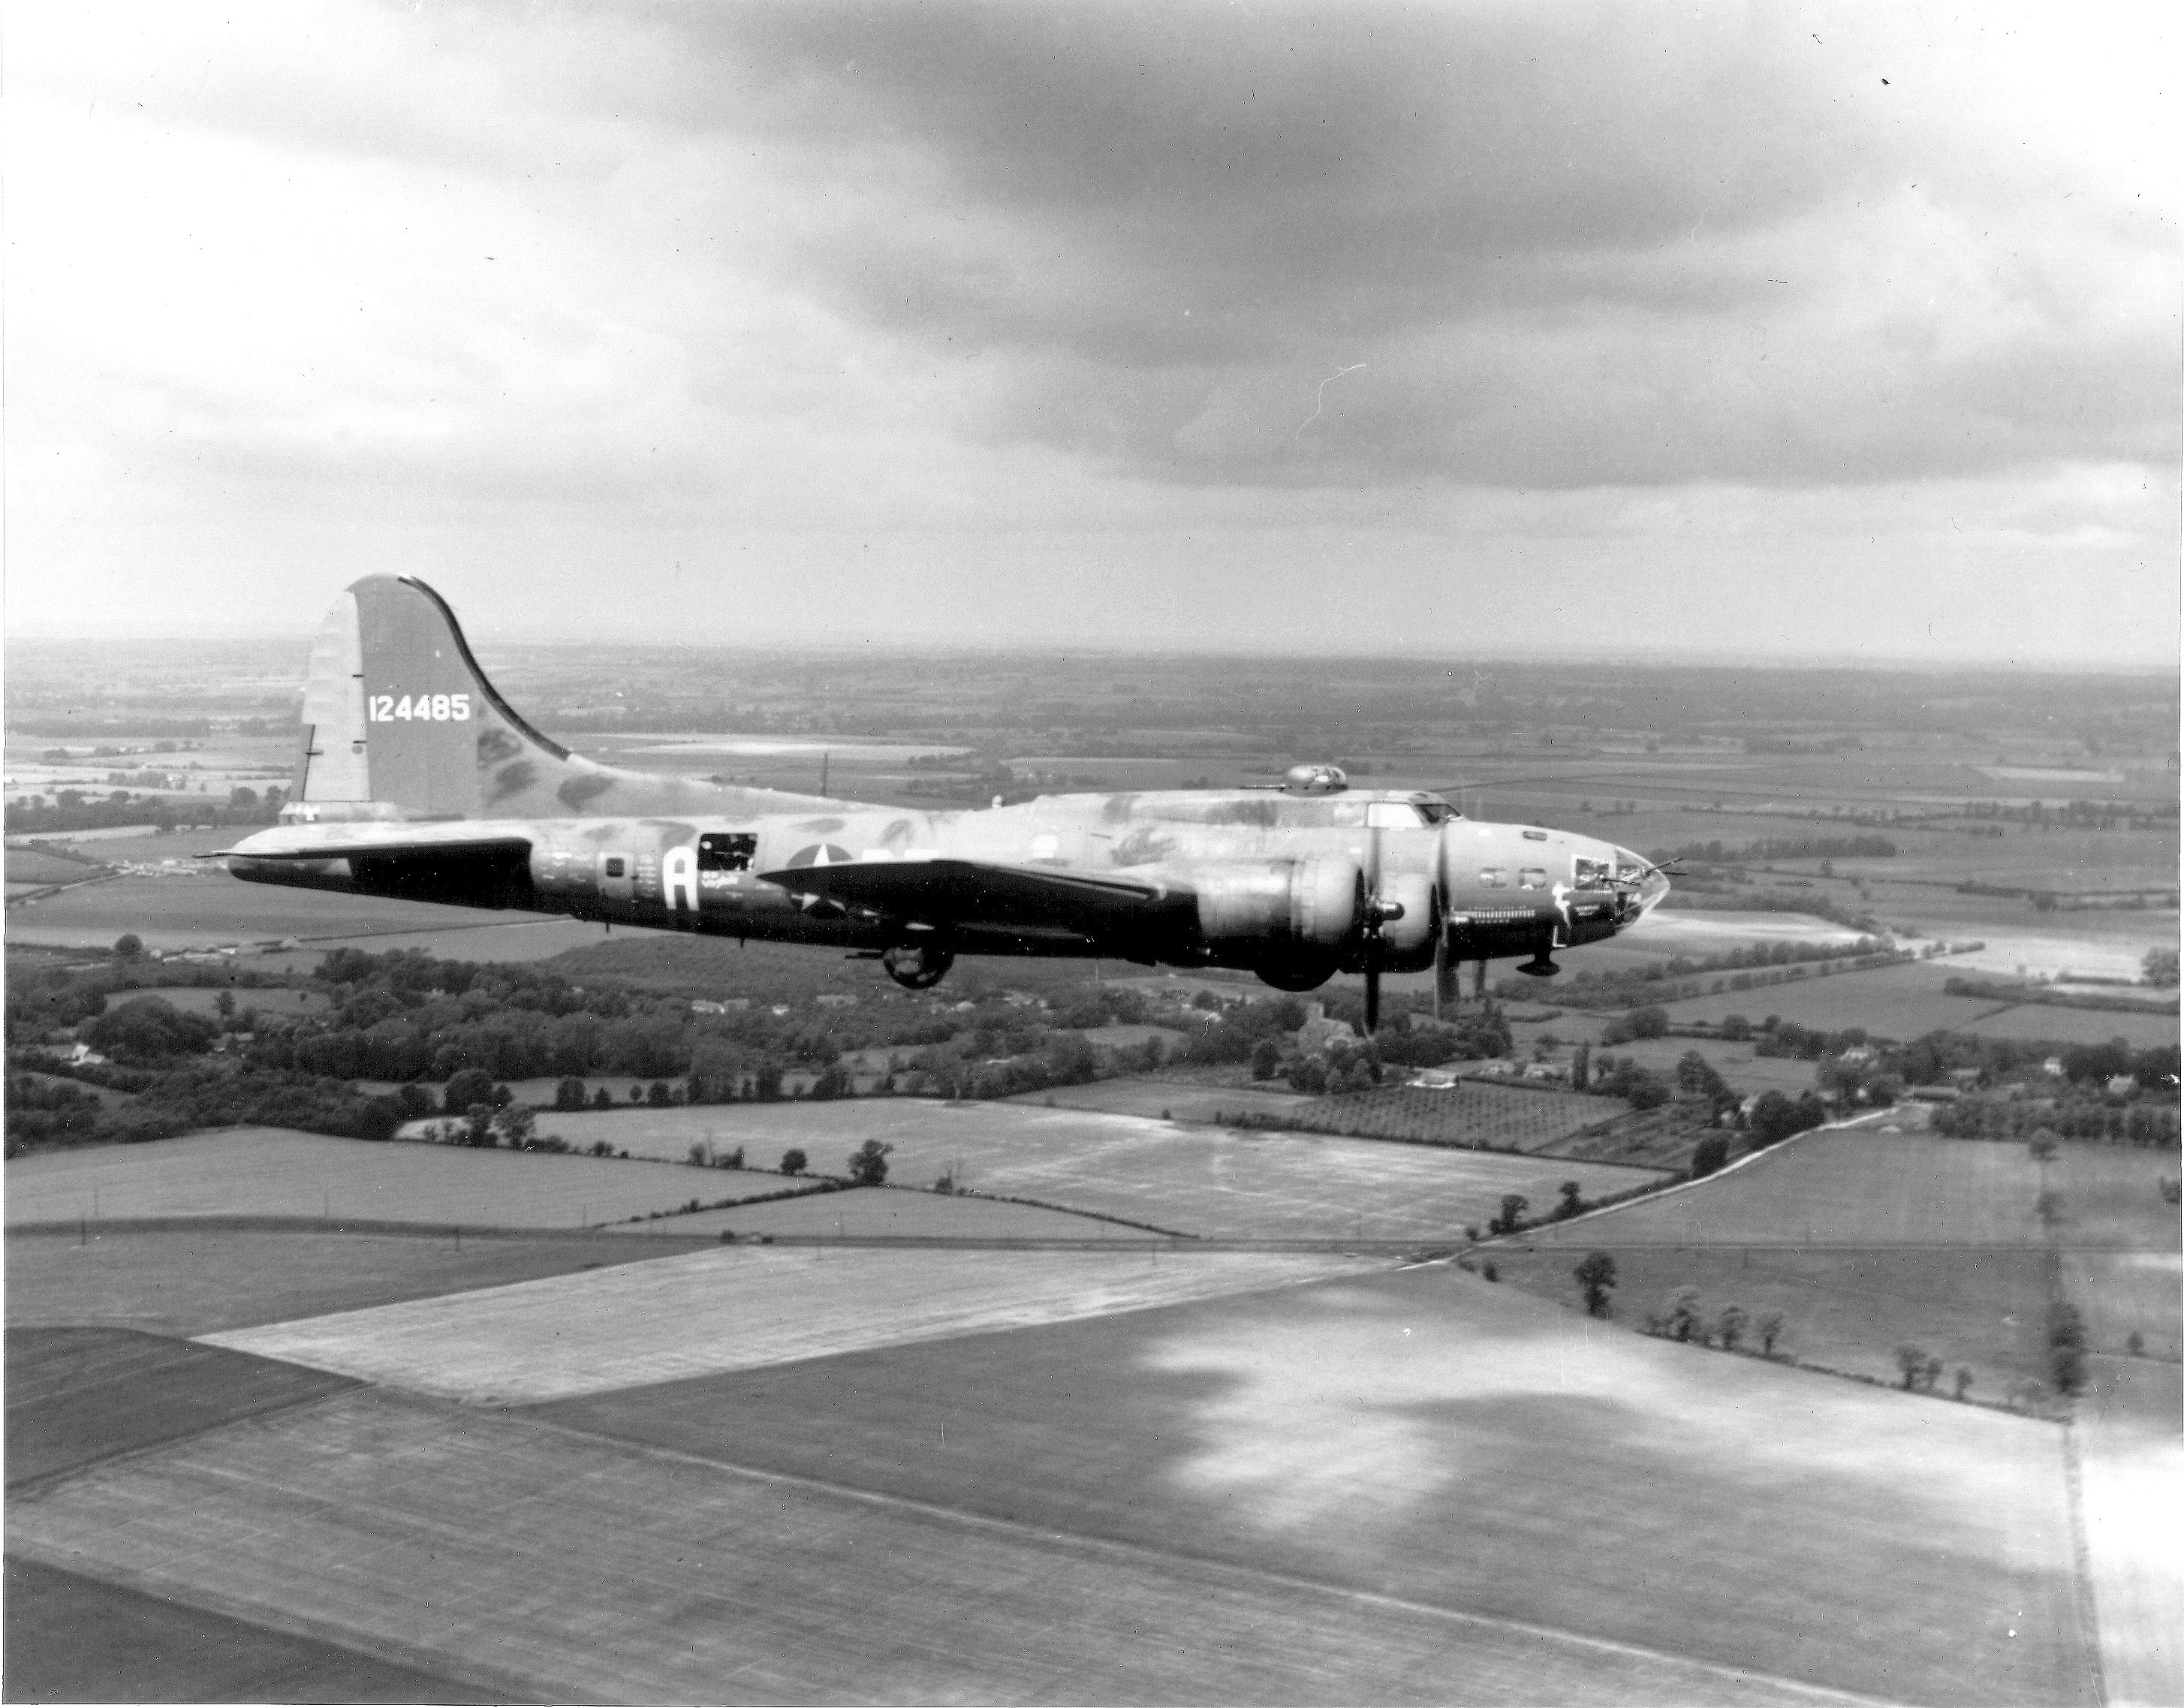 B-17F bomber 'Memphis Belle' of 324th Bomb Squadron, USAAF 91st Bomb Group in flight in the United States, 9 Jun 1943